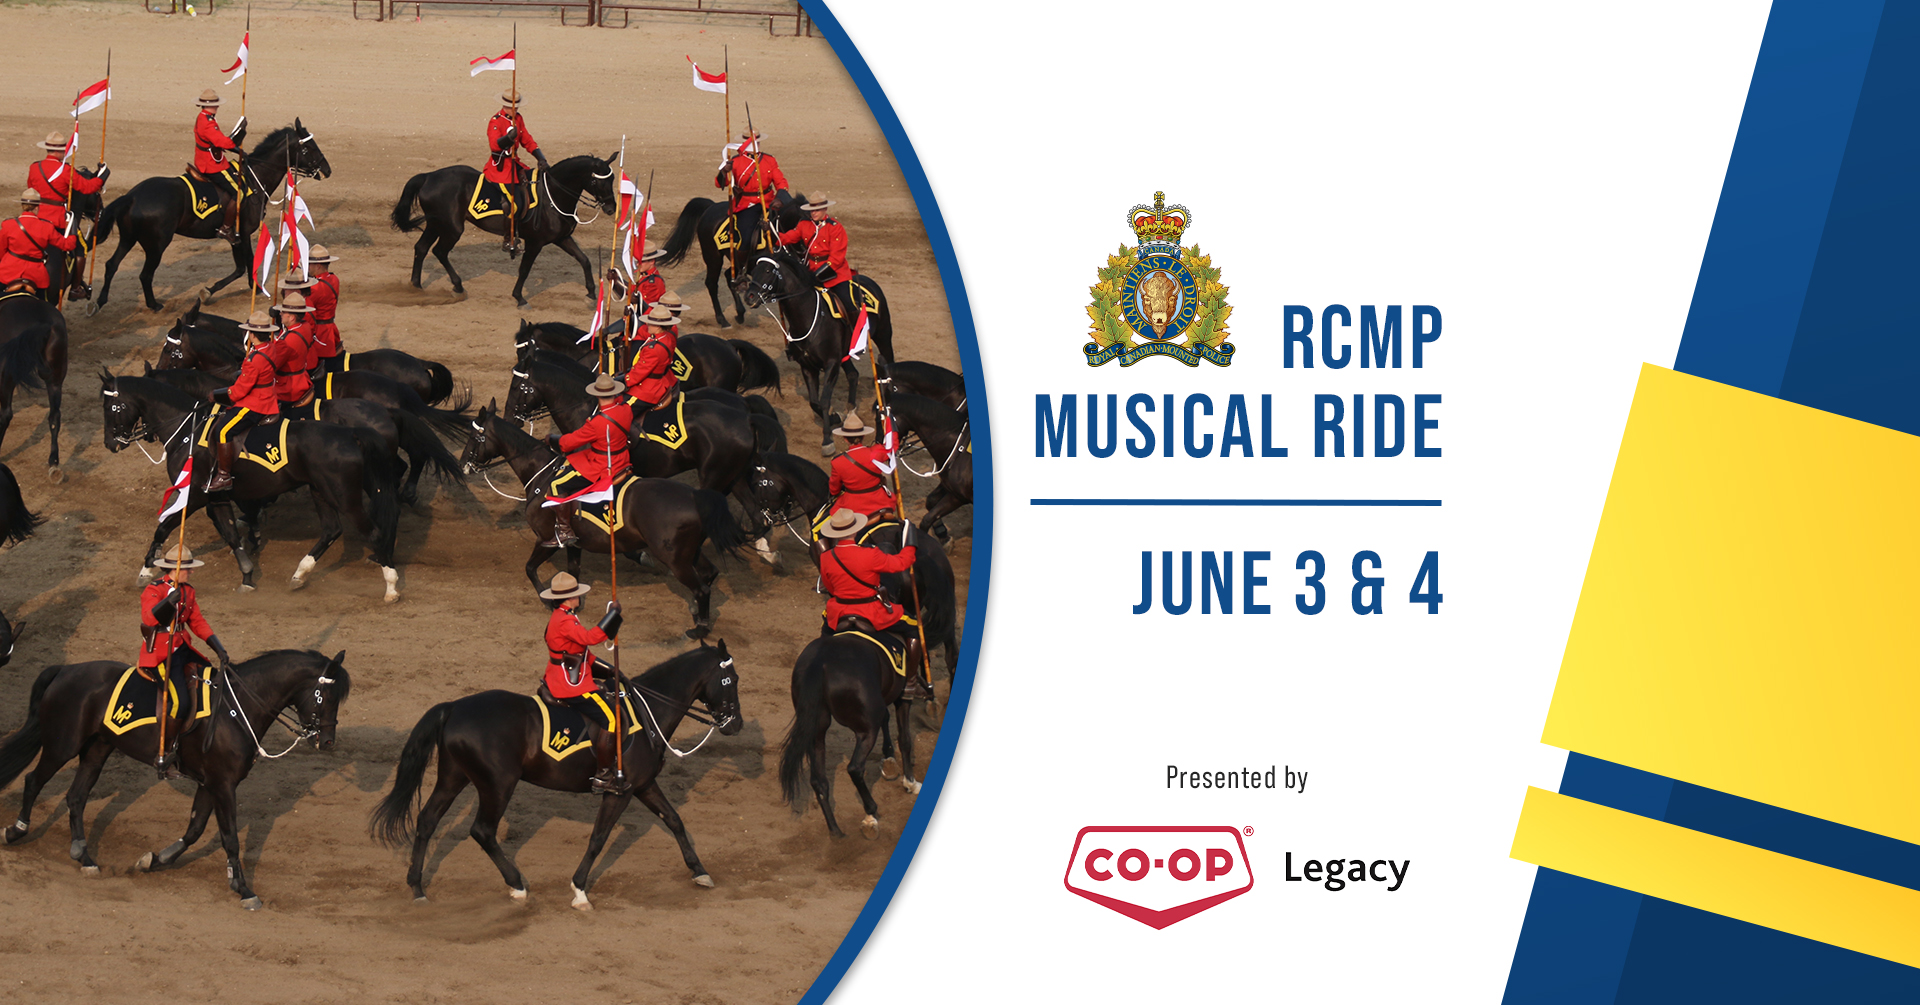 RCMP Musical Ride - June 3 and 4